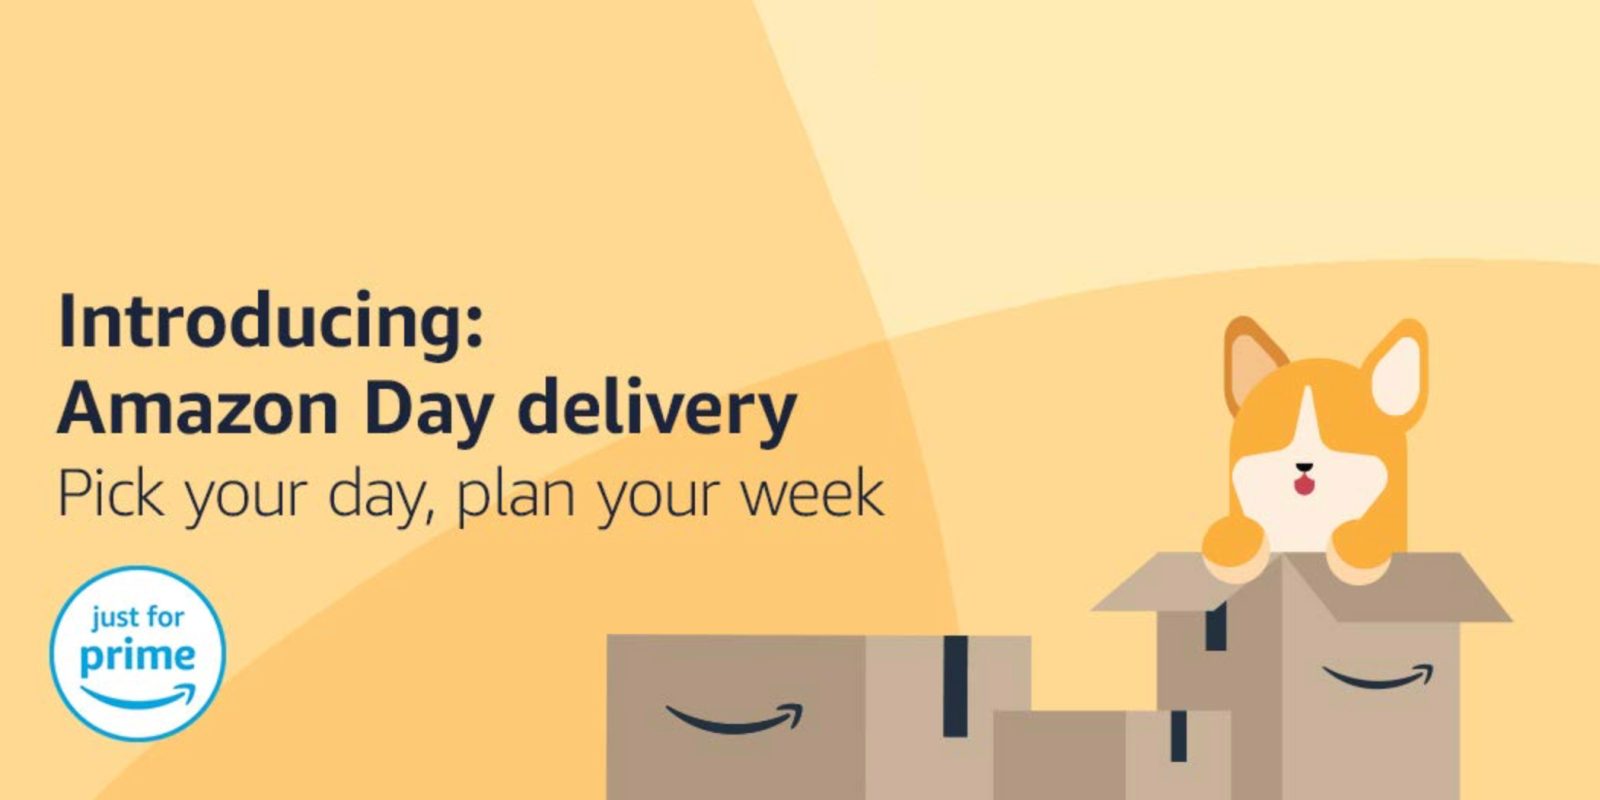 Amazon Day offers custom deliveries for Prime members 9to5Toys